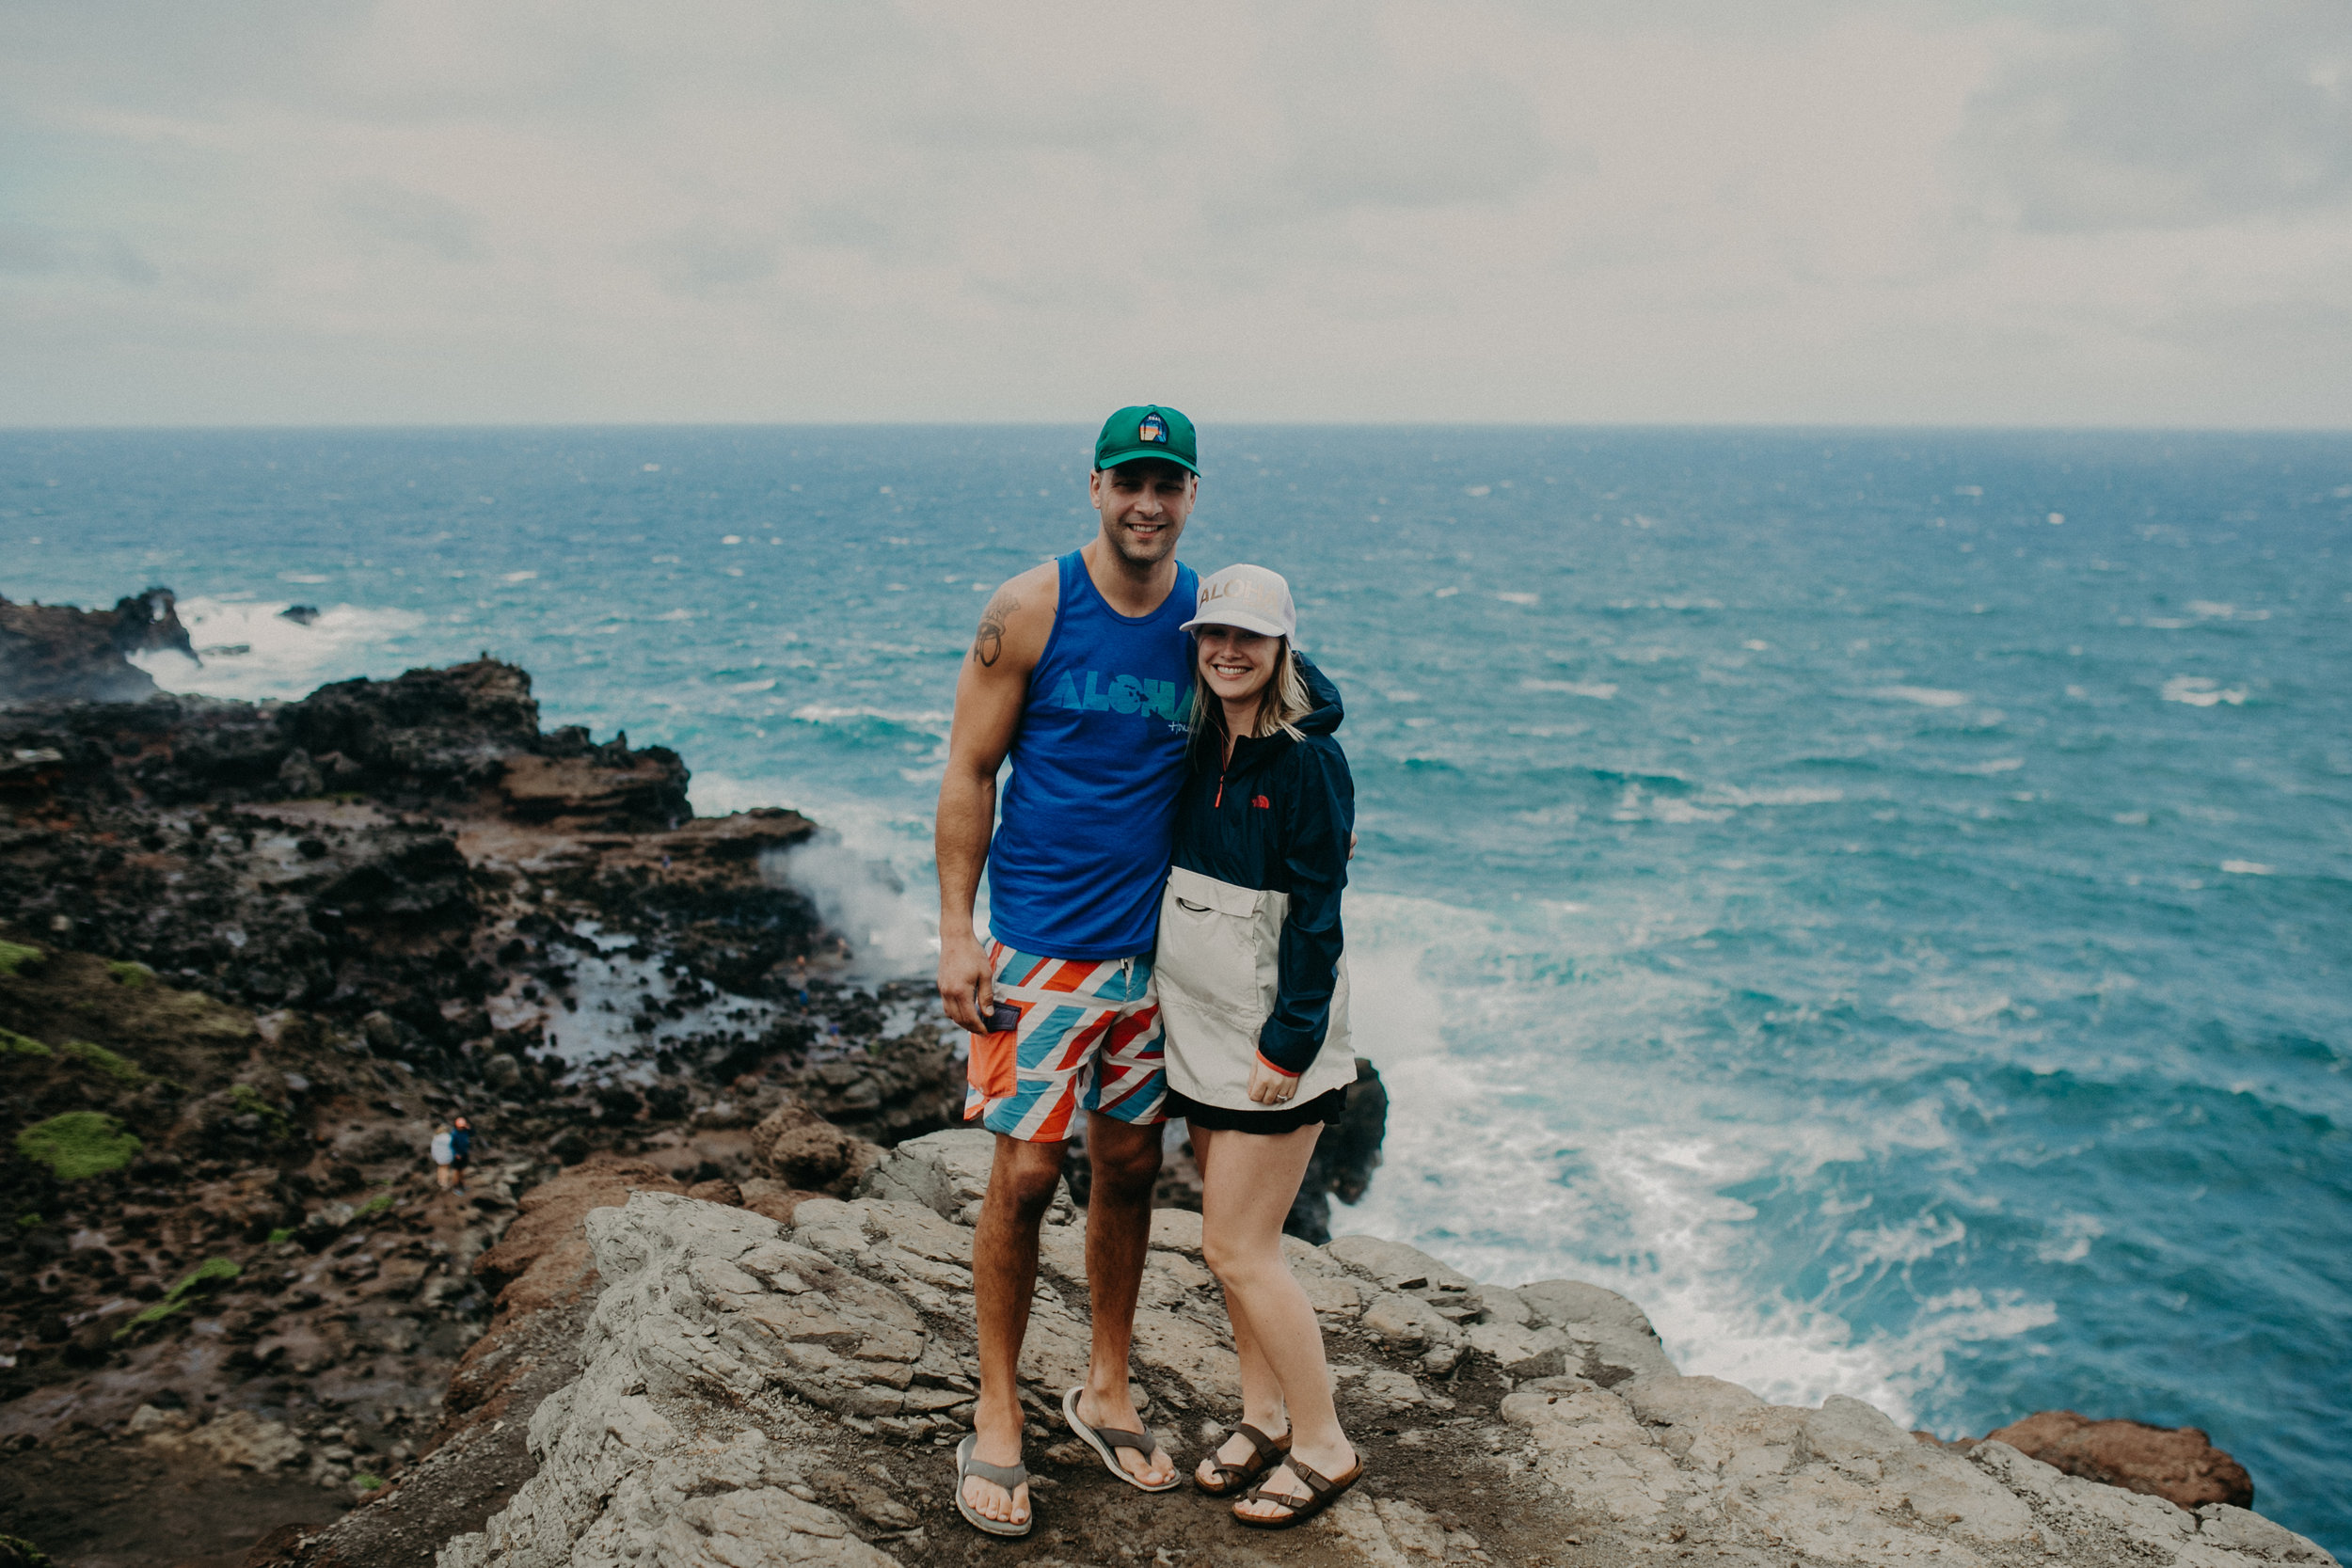  Andrea and Mike Wagner stand on the cliffs of Maui Hawaii near the Nakalele Blowhole in February 2019 while on vacation 